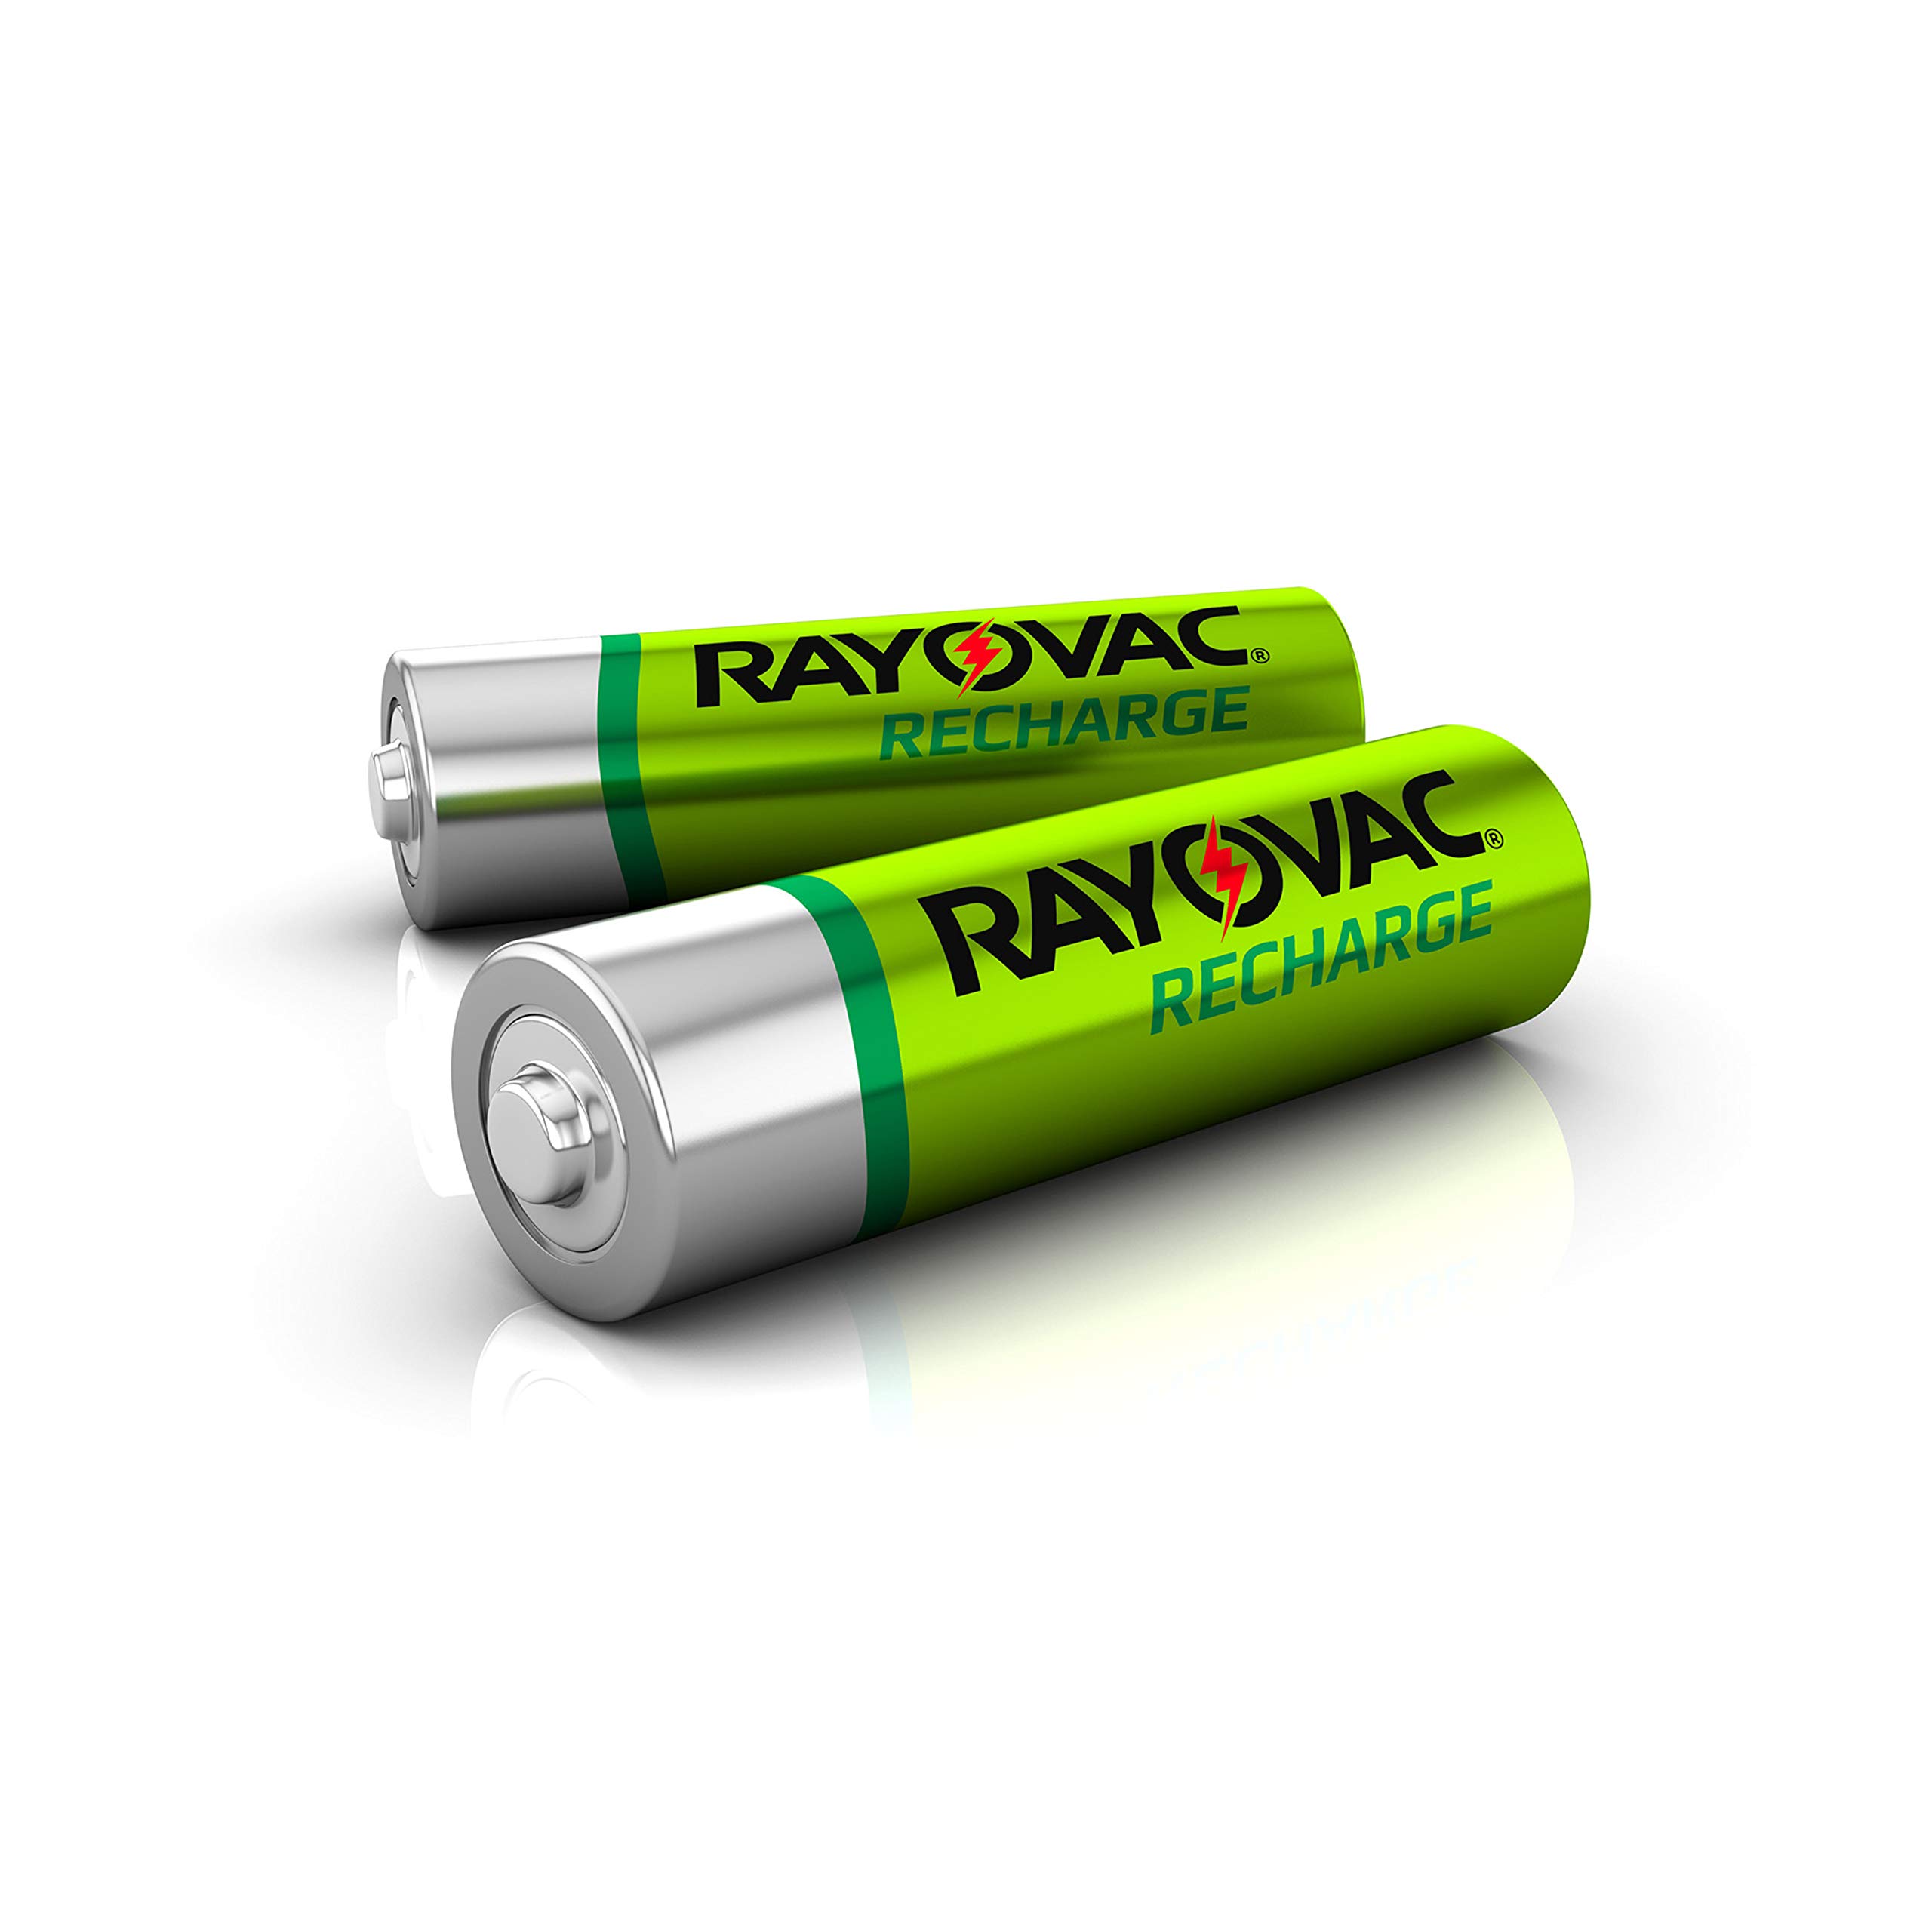 Rayovac Rechargeable AA Batteries, Rechargeable Double A Batteries (4 Count)